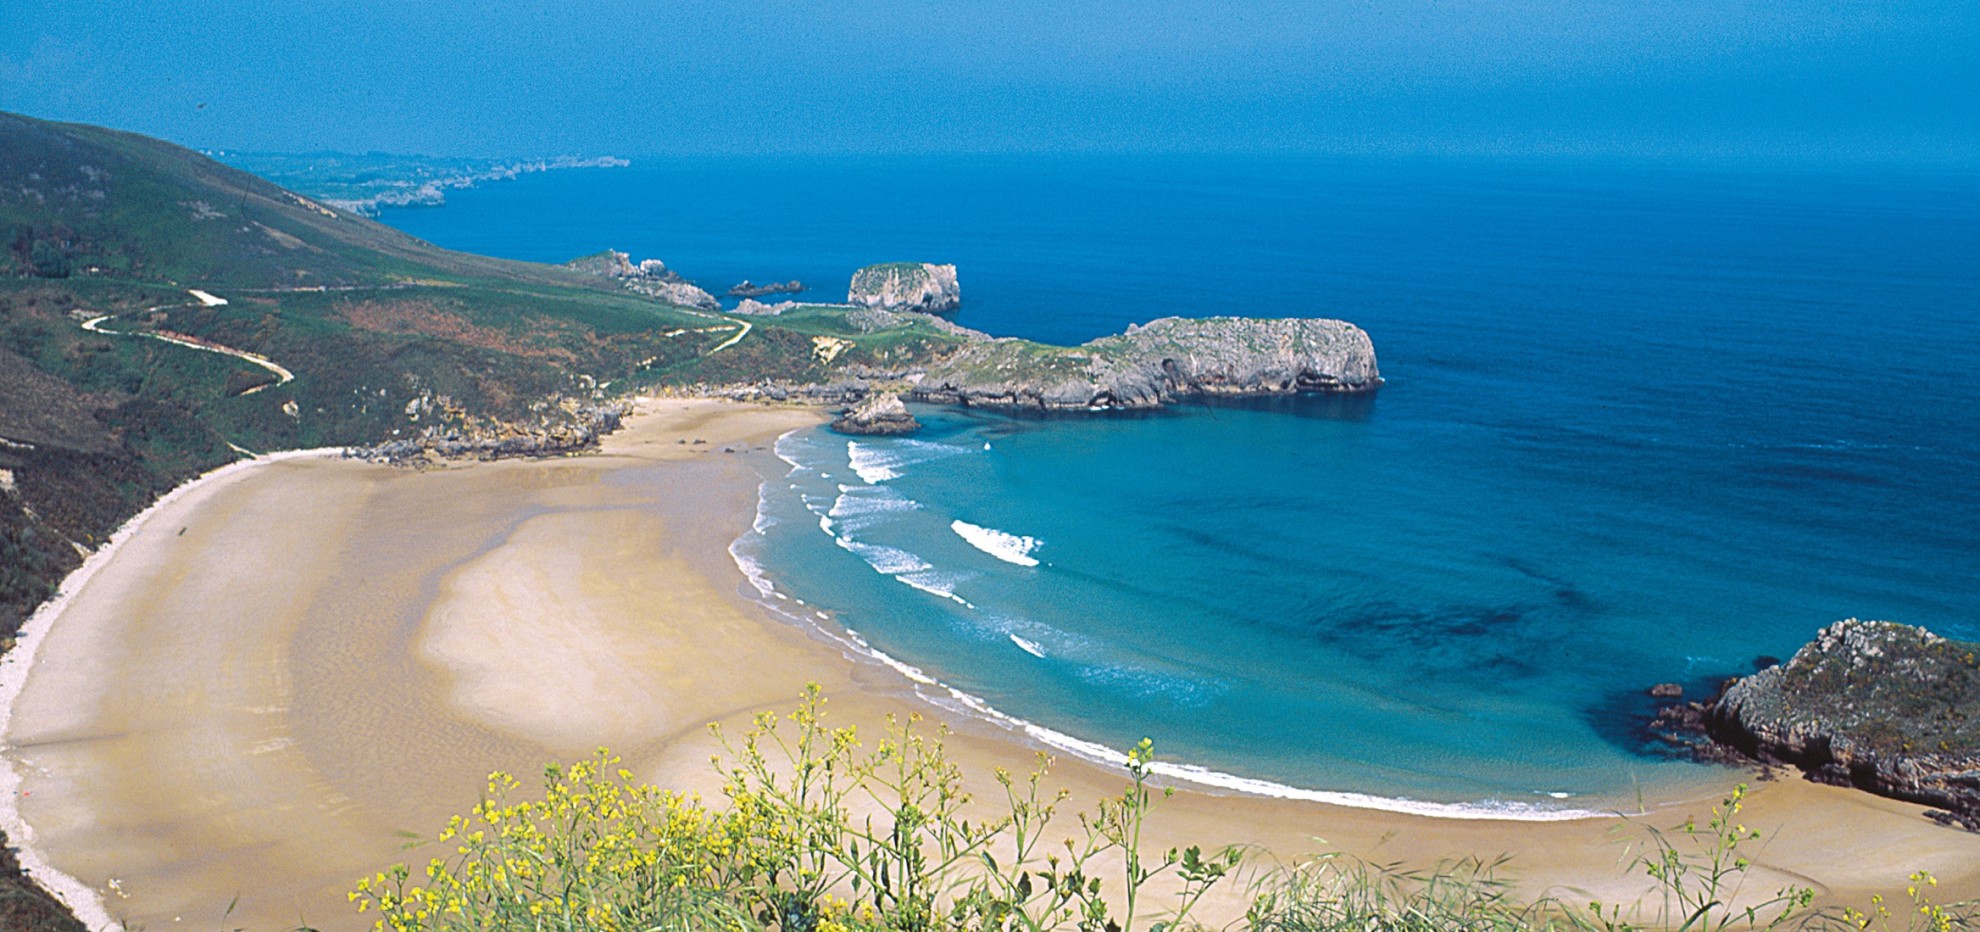 Beach view on the Peaks and Coast of Spain tour